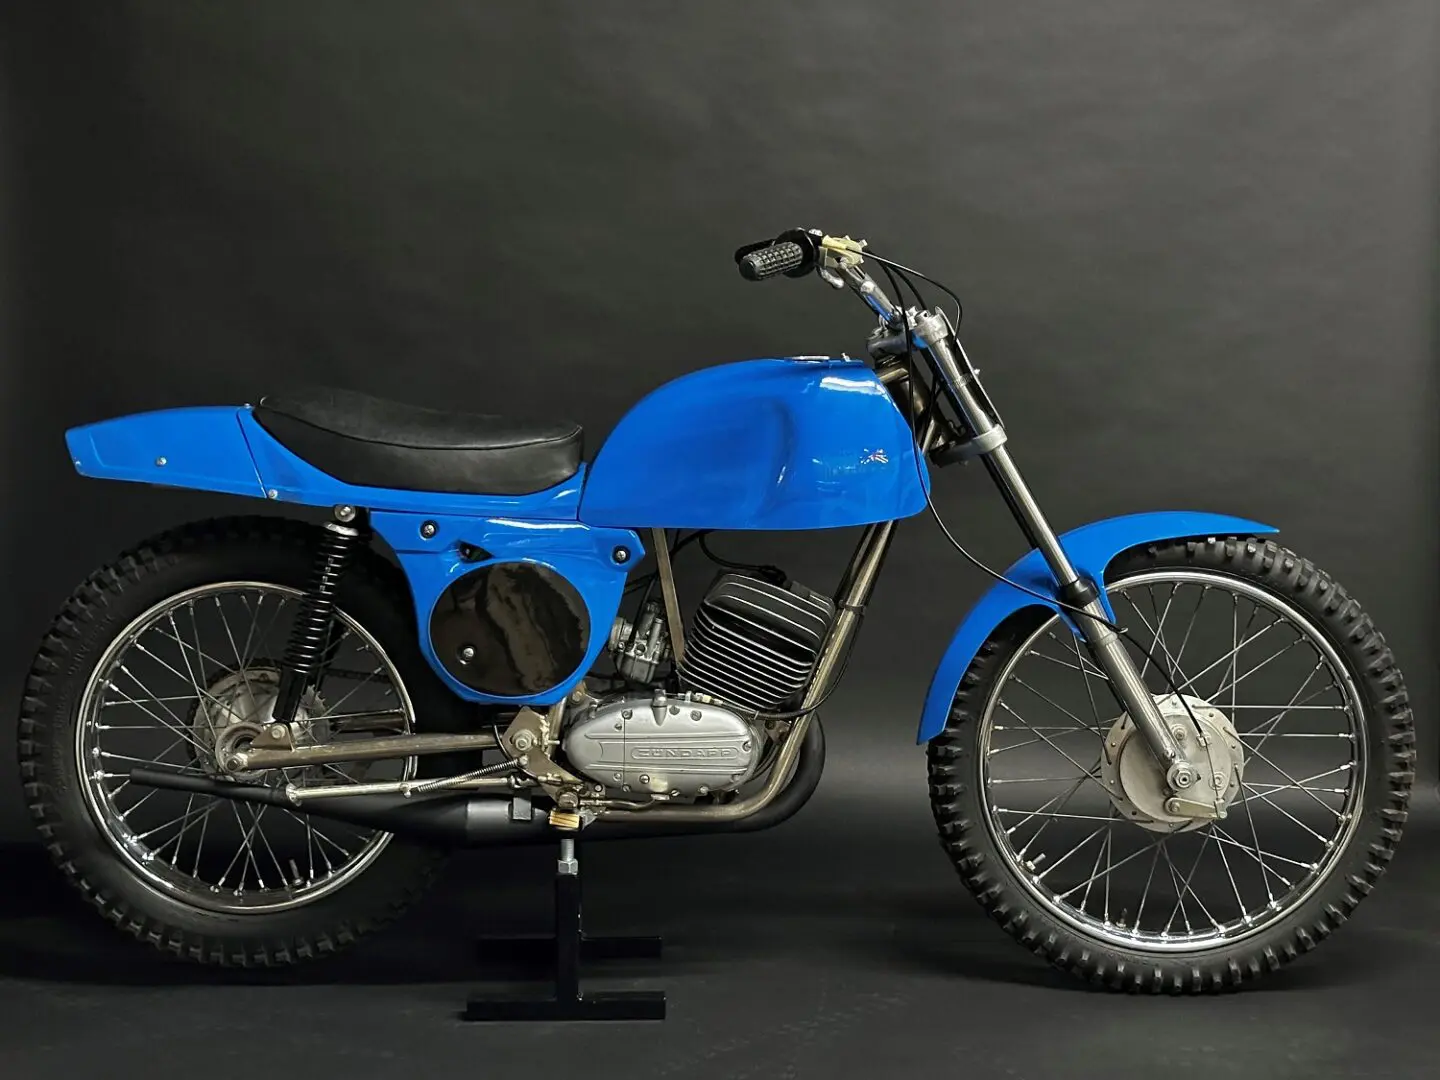 A Blue Color Bike With a Single Seat Image Other Side